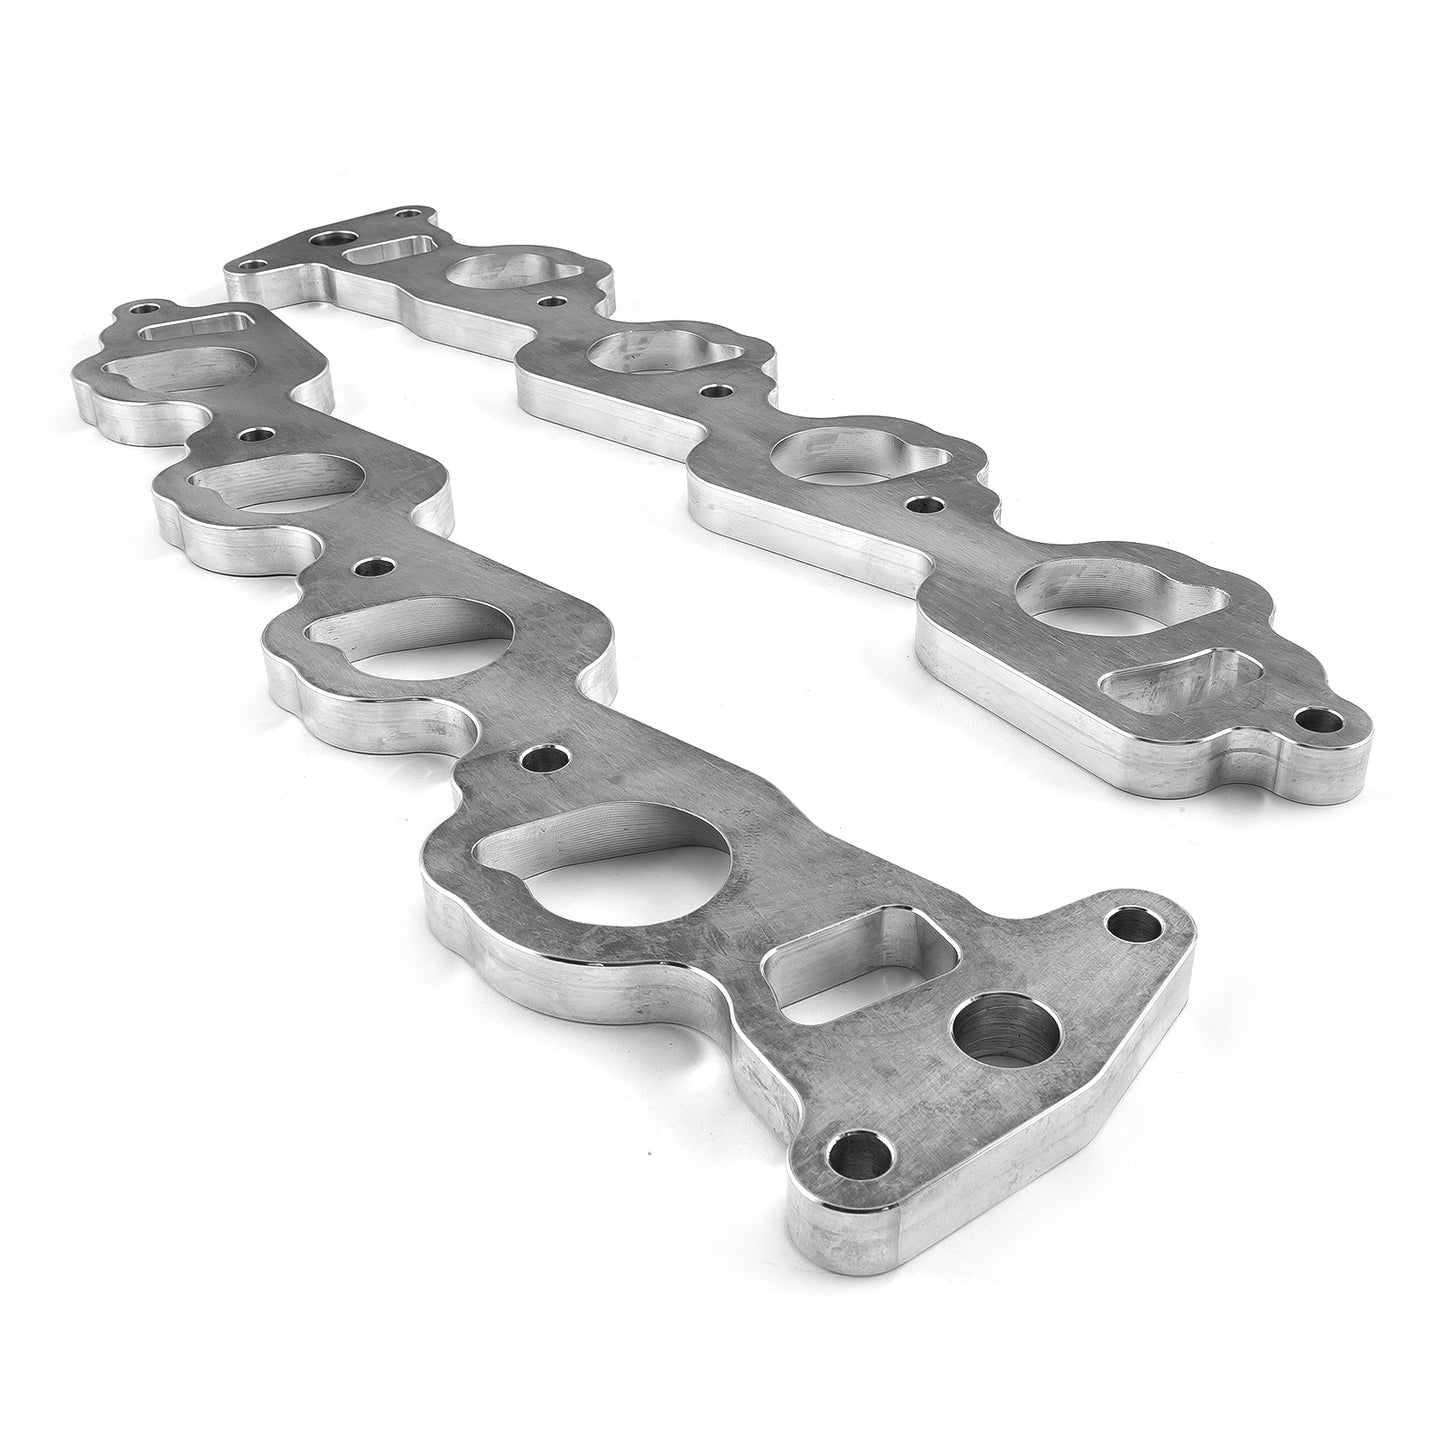 Speedmaster PCE517.1003 4.6L Non-PI To 4.6L PI Fits Ford Modular Intake Manifold Spacer Adapter Kit